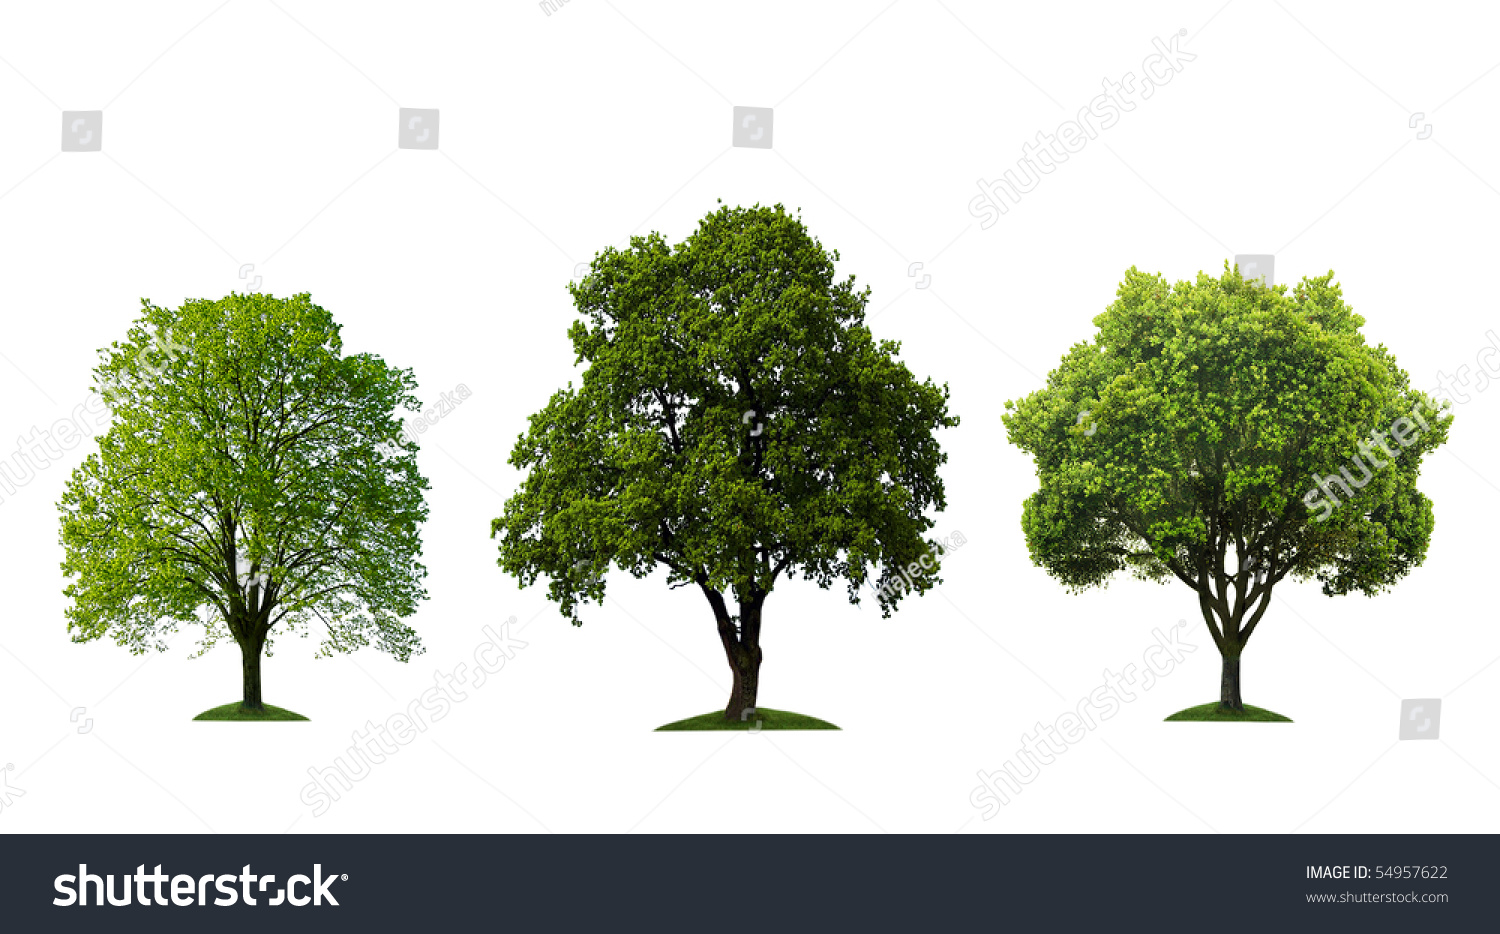 Green Trees Isolated On White Stock Photo 54957622 : Shutterstock